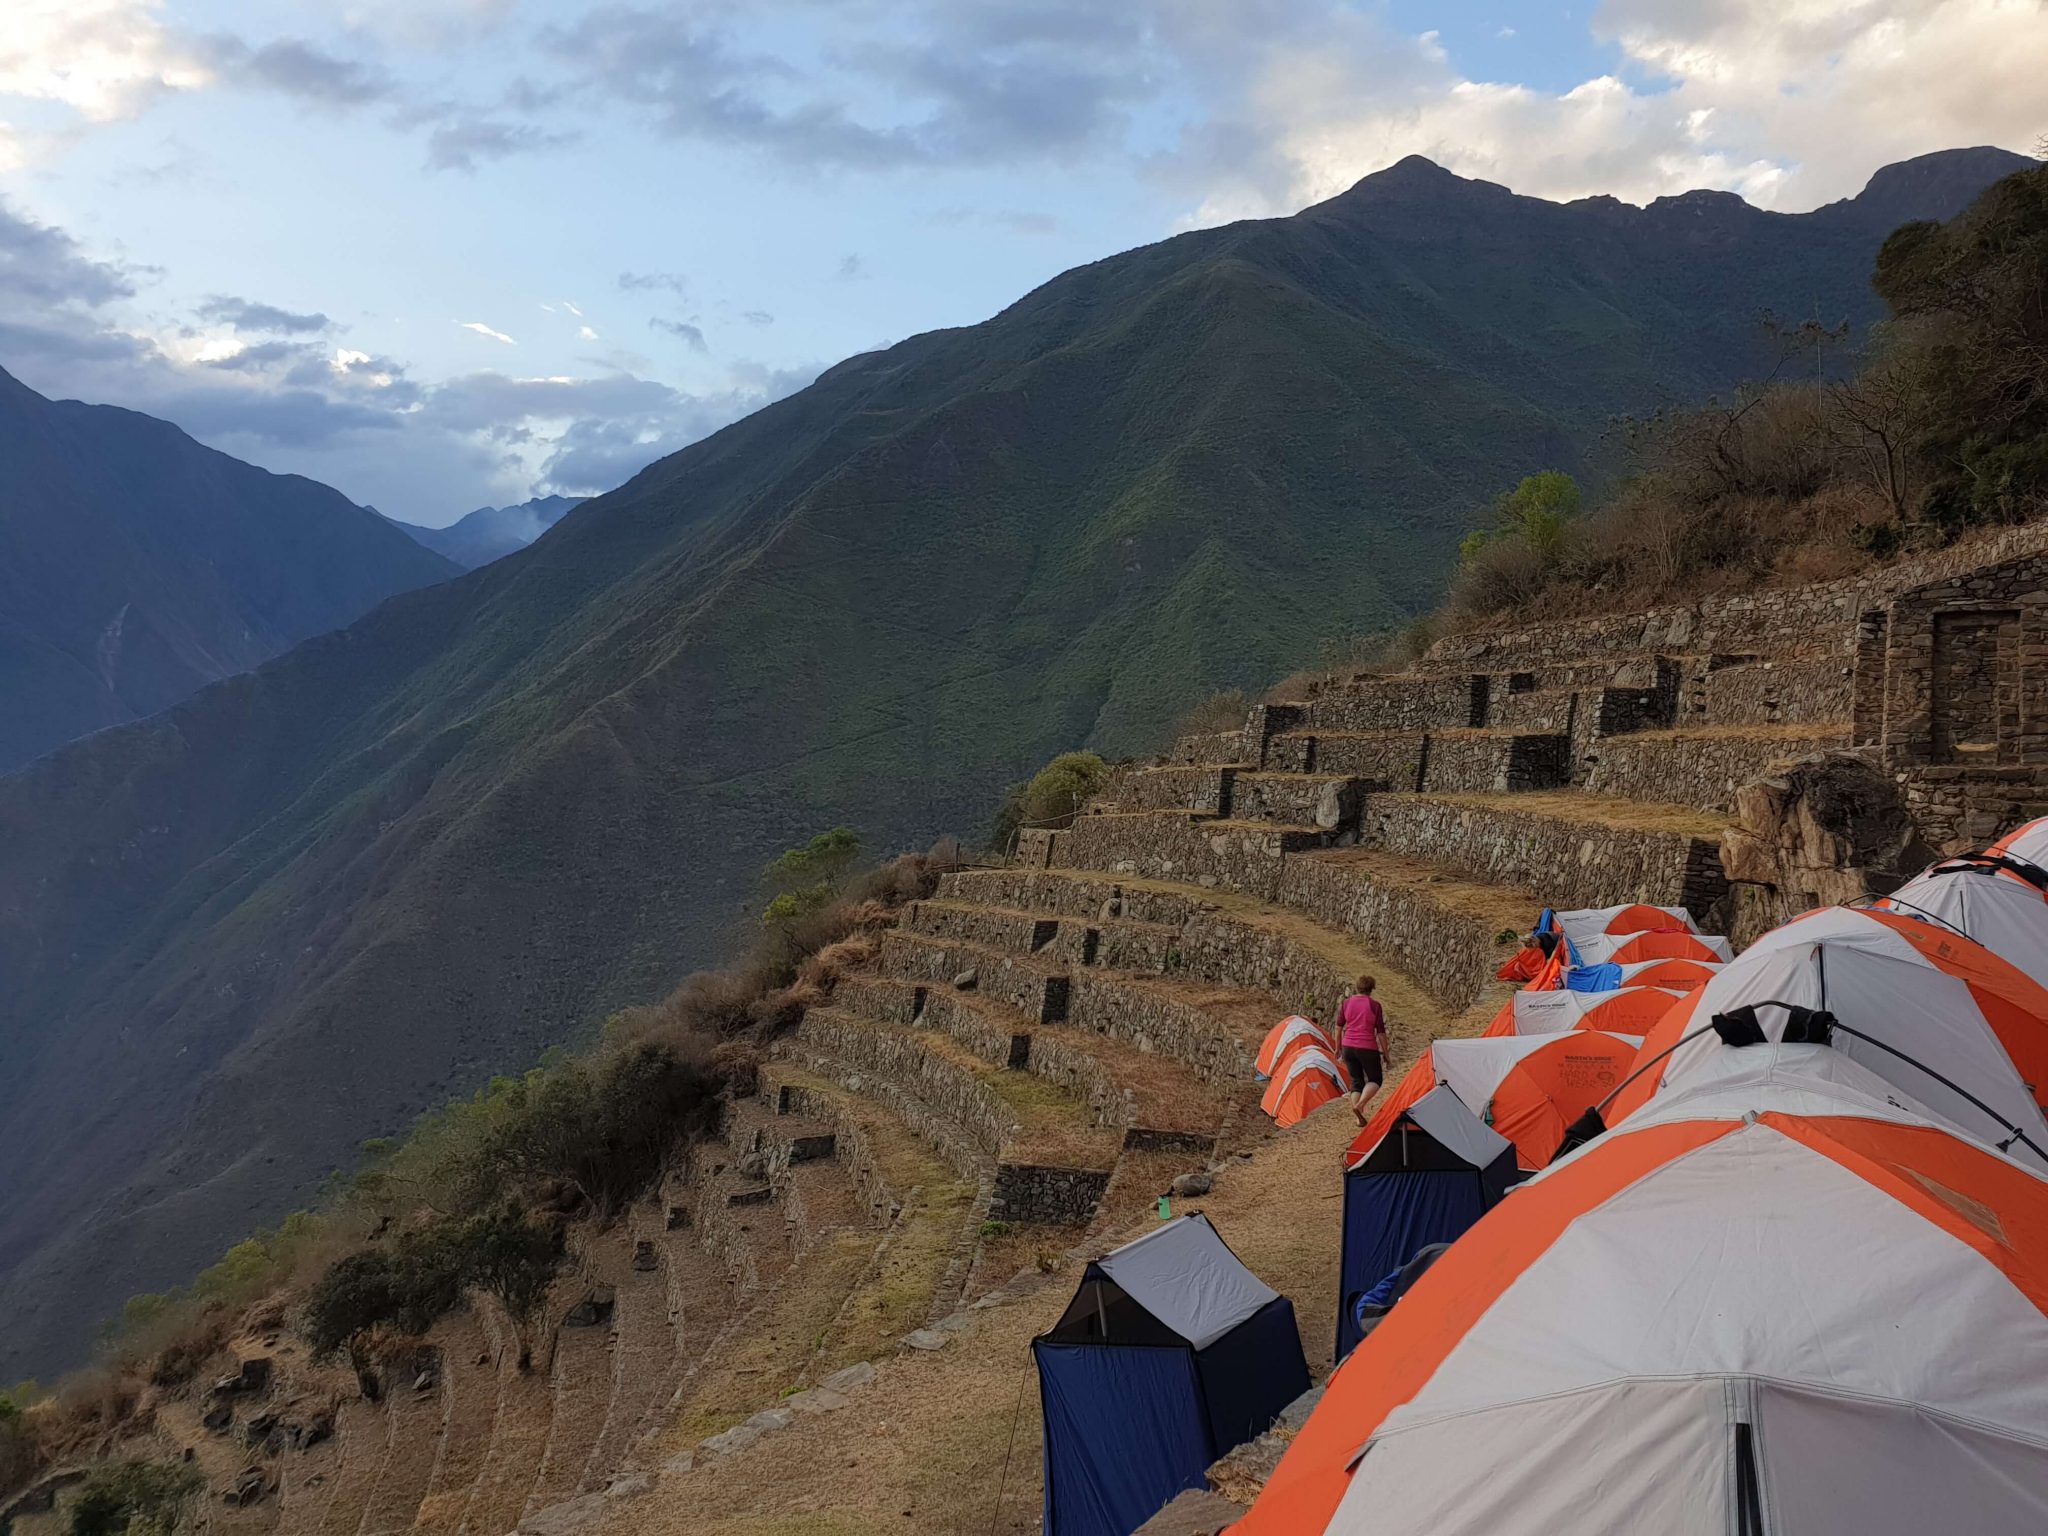 Camp set up on the Inca Trail with Earth's Edge